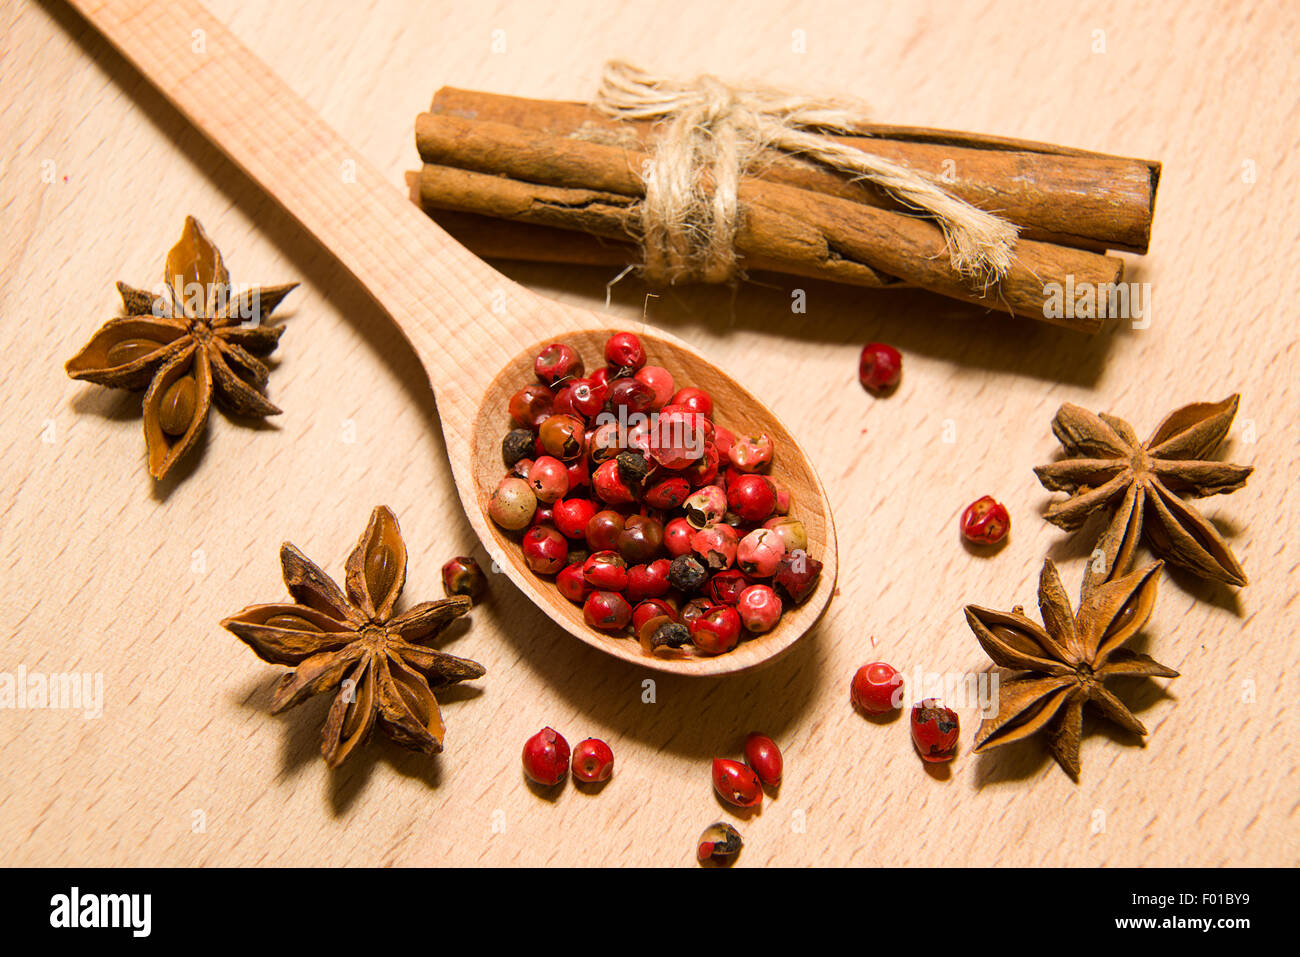 wooden Spoon with a mixture of grains of pepper, cinnamon and star anise on a wooden surface Stock Photo